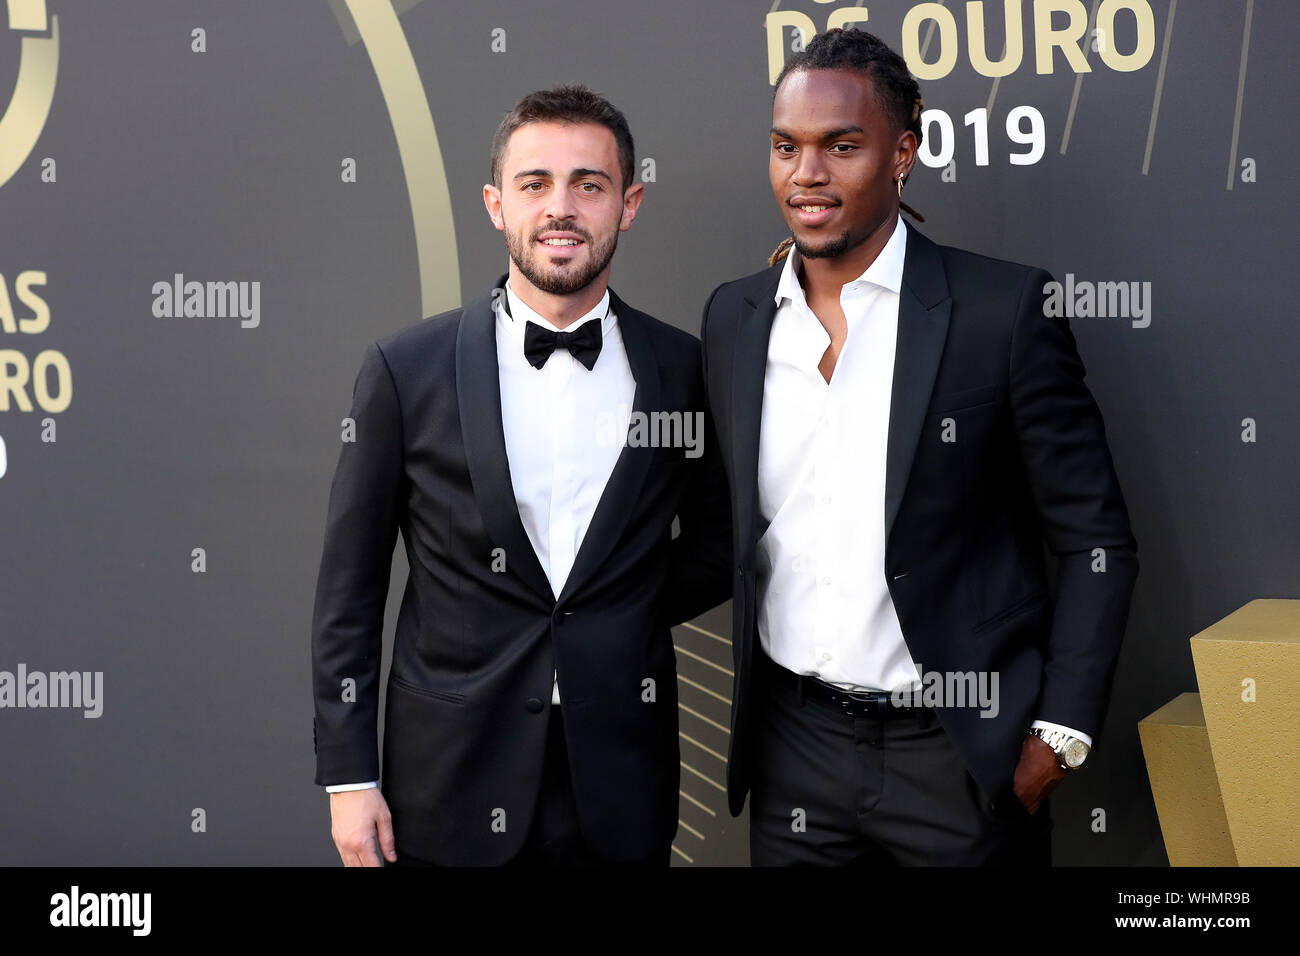 Lisbon, Portugal. 2nd Sep, 2019. Portugal's midfielders Bernardo Silva (L) and Renatos Sanches arrive for the Portuguese Football Federation 'Quinas de Ouro 2019' awards ceremony at Carlos Lopes hall in Lisbon, Portugal, on Sept. 2, 2019. Credit: Pedro Fiuza/Xinhua Credit: Xinhua/Alamy Live News Stock Photo